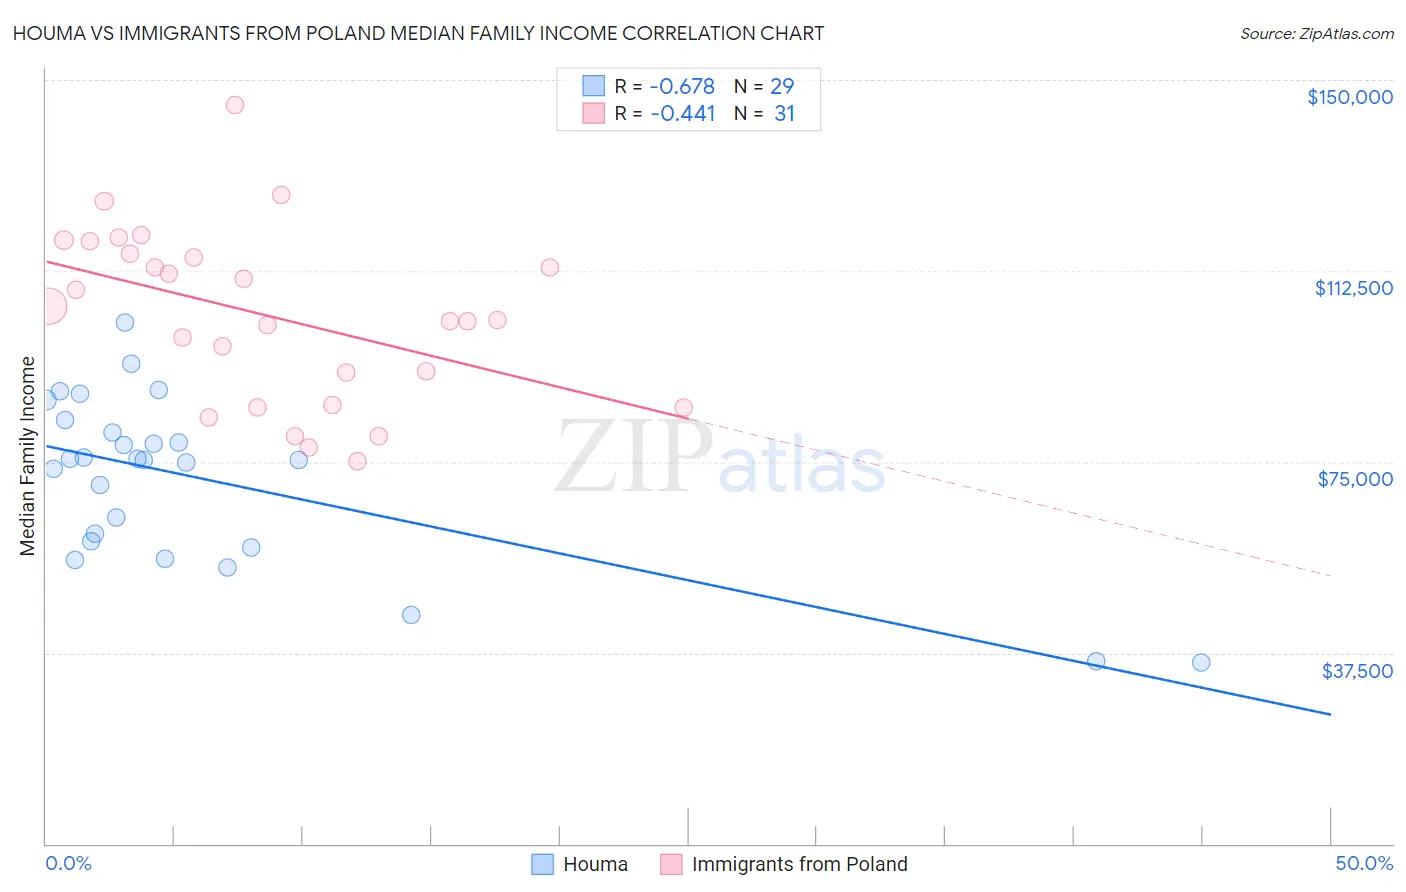 Houma vs Immigrants from Poland Median Family Income